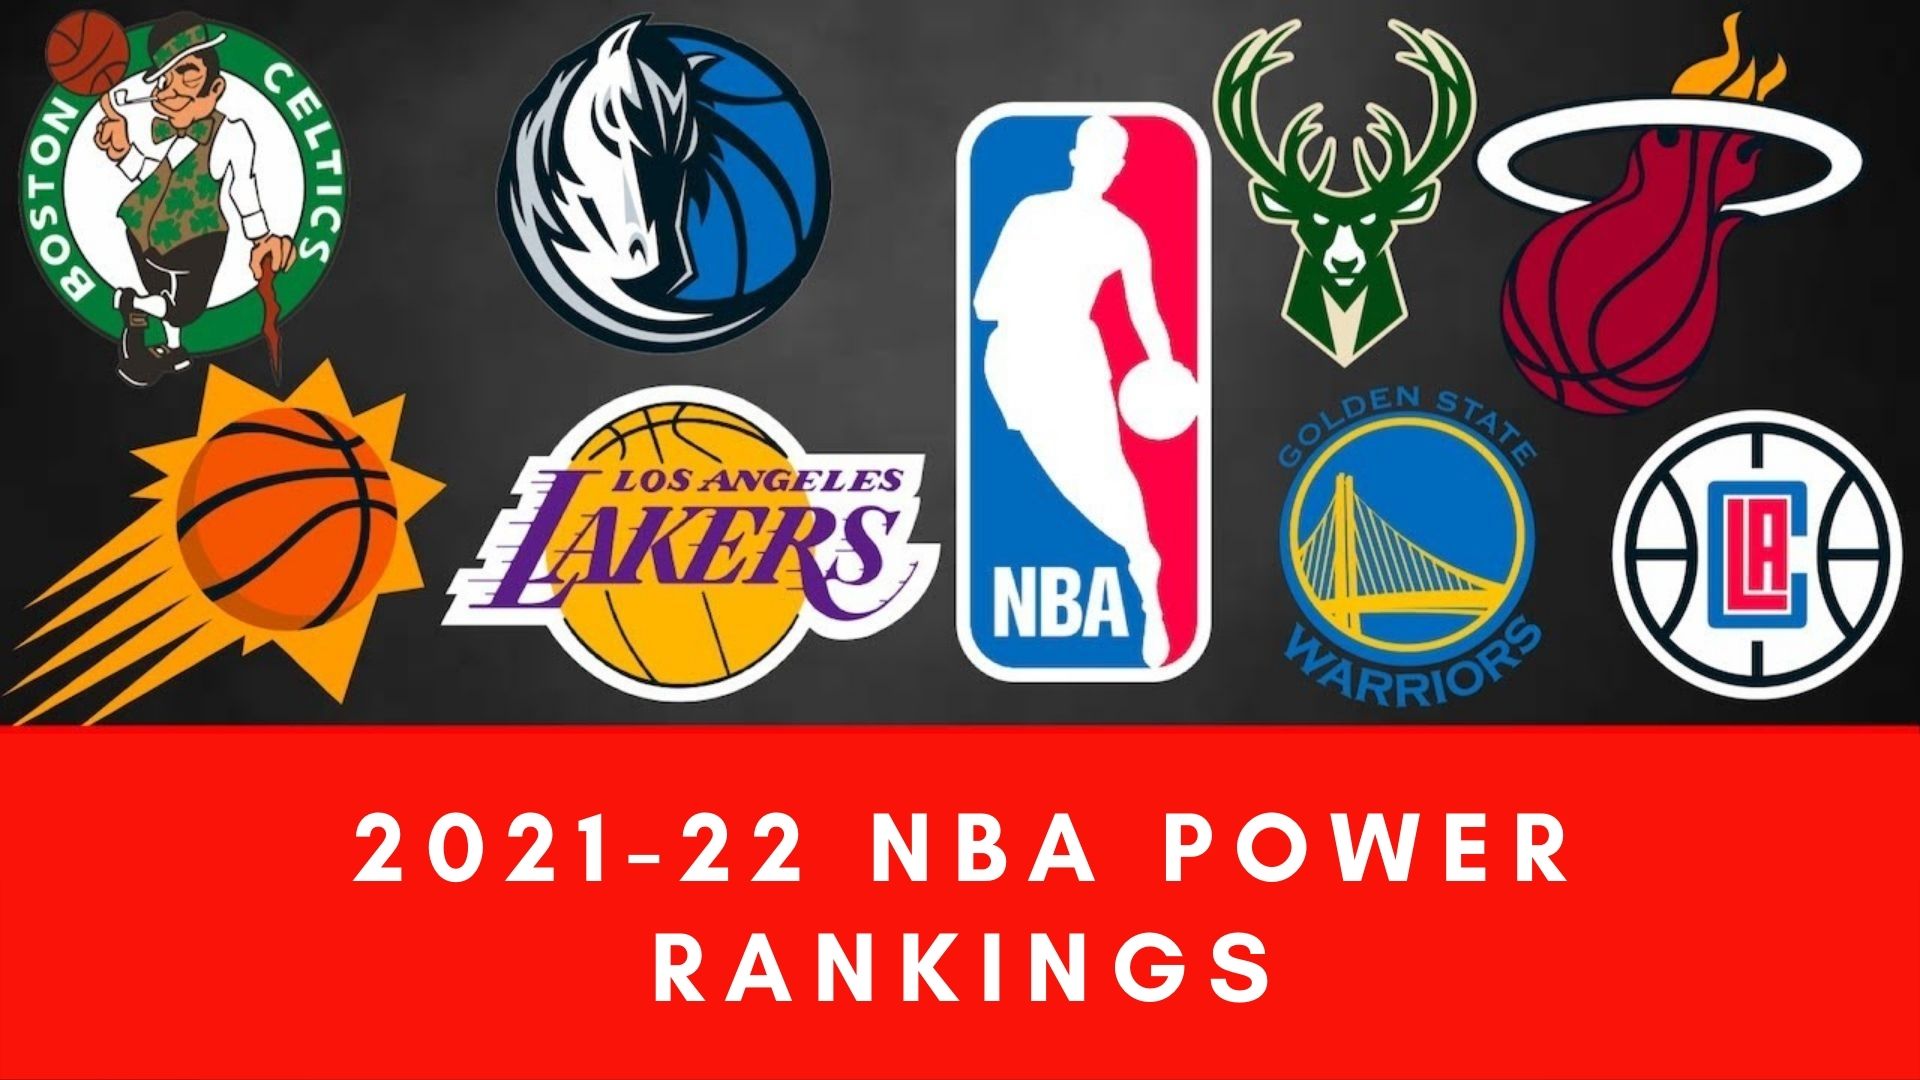 What are the Power Rankings in the NBA?